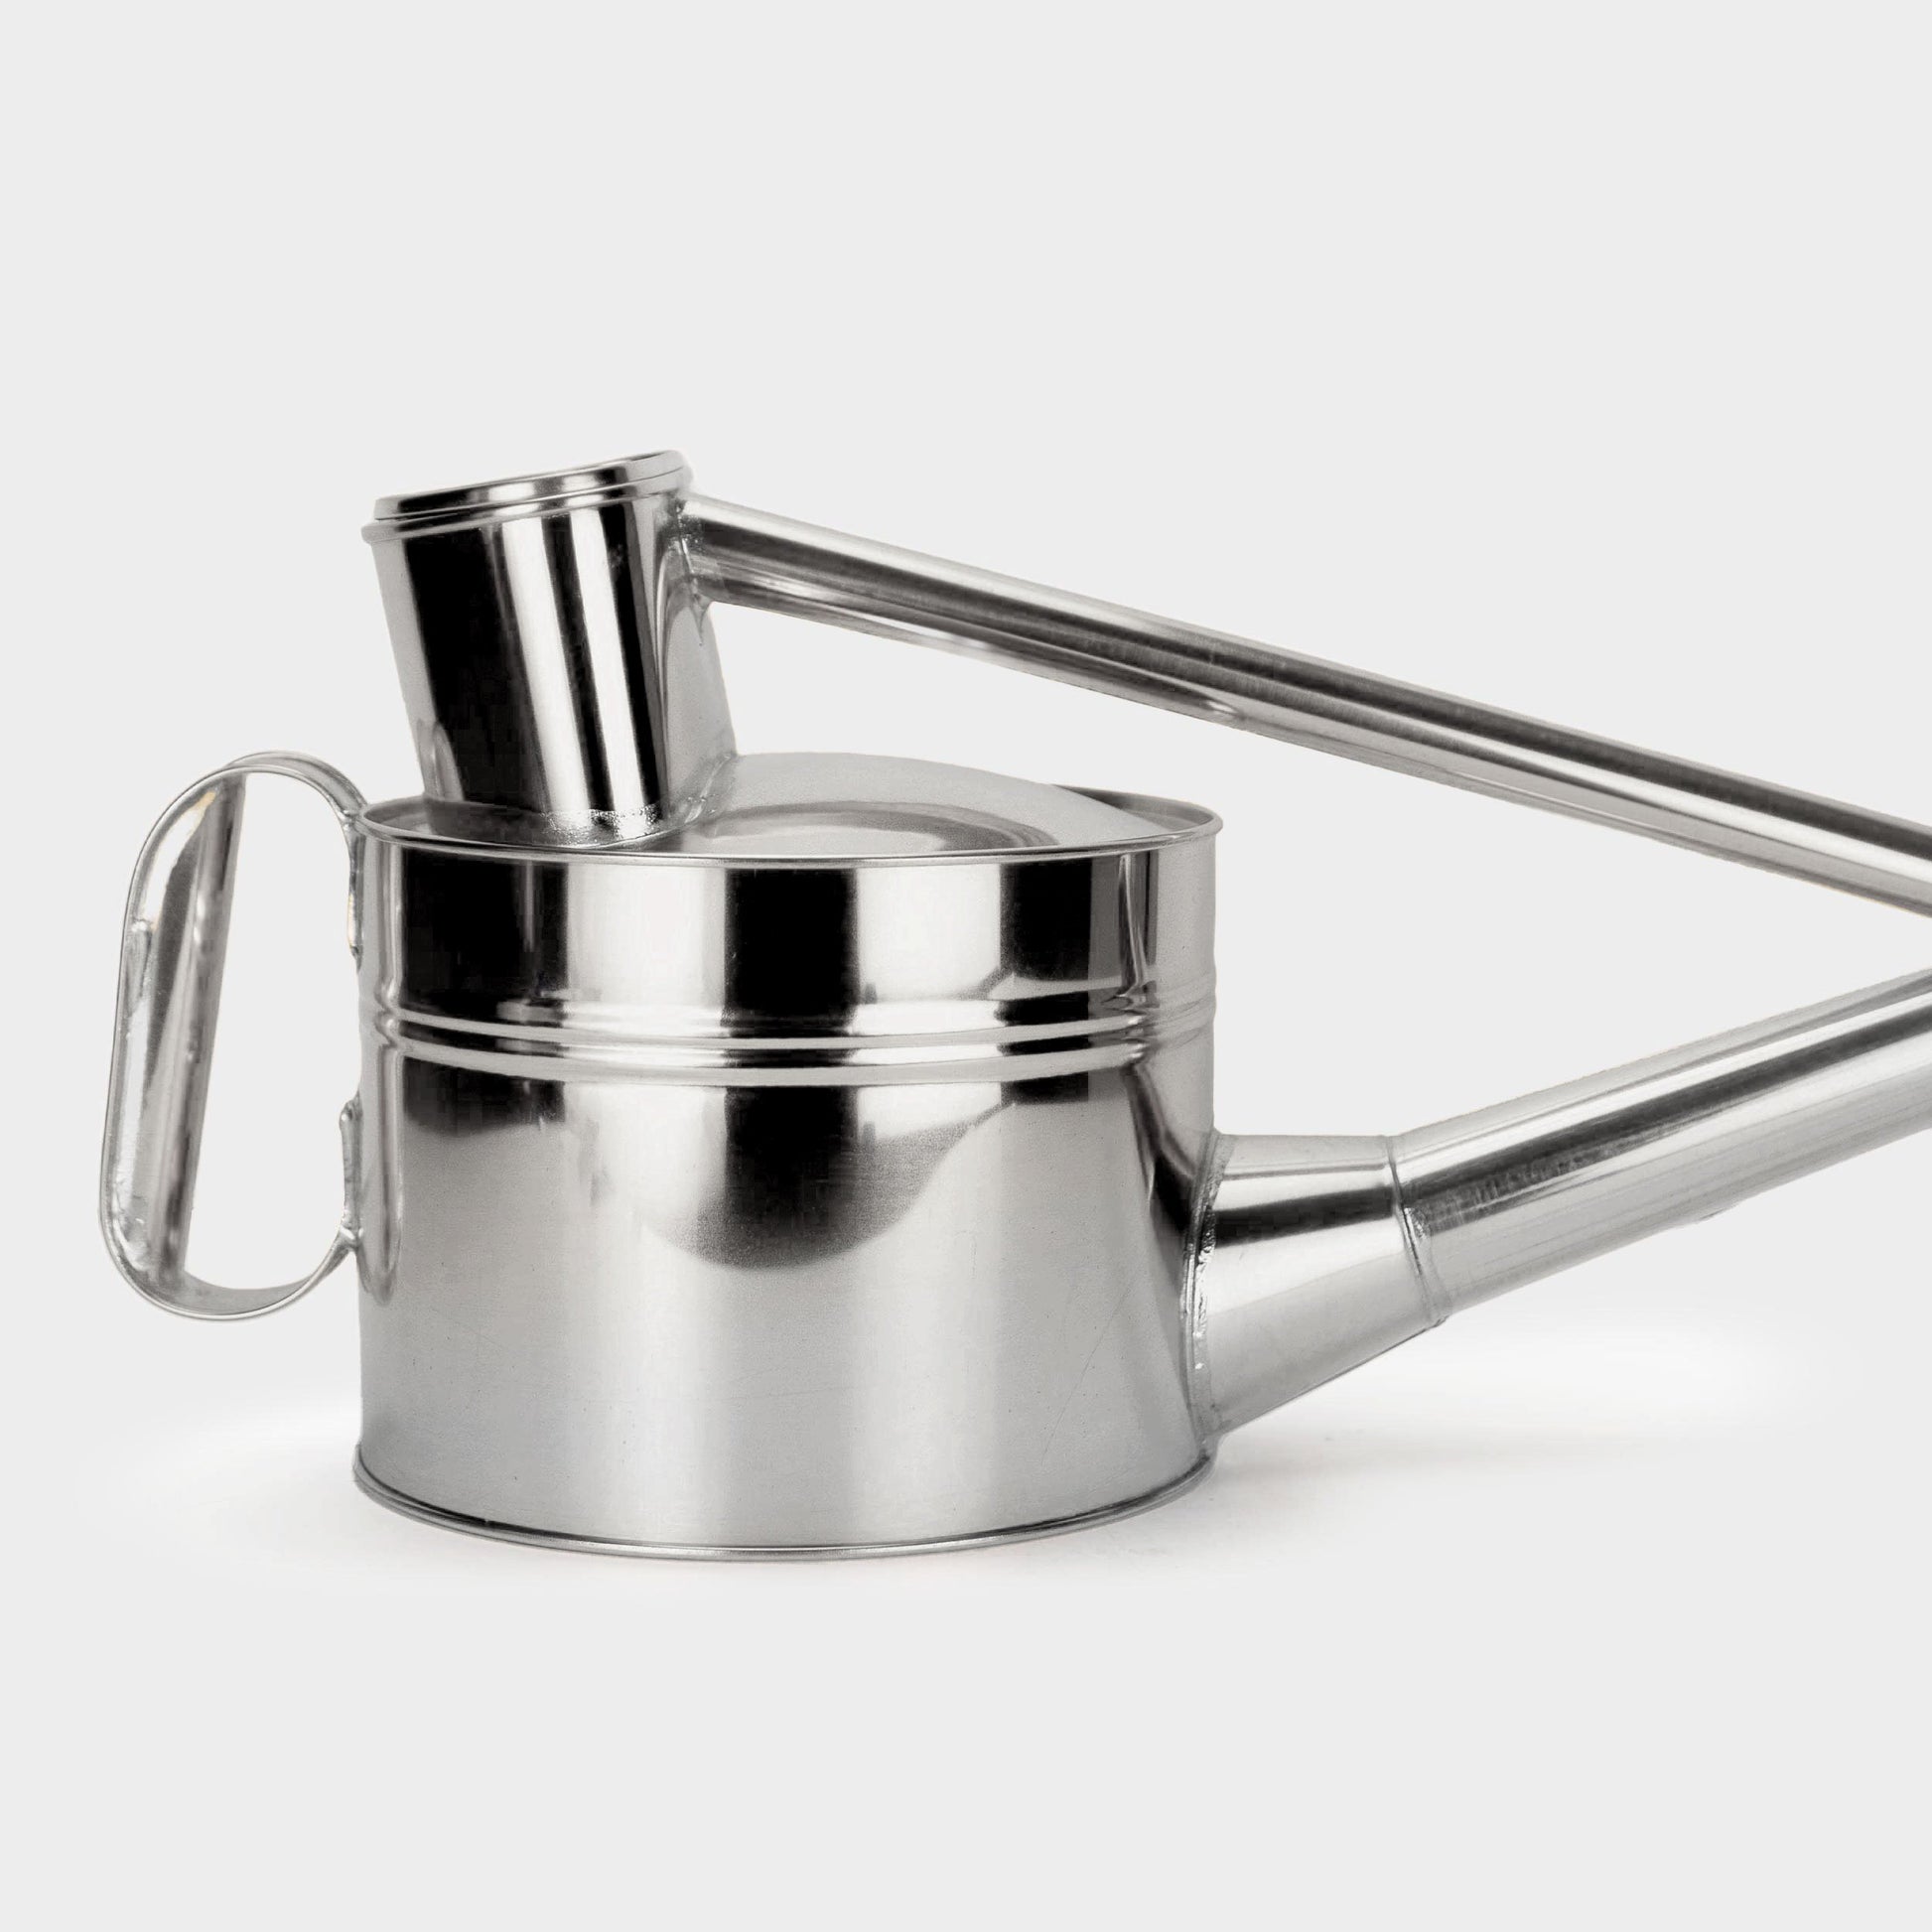 British Style Stainless Steel Watering Can No. 4 by Negishi Industry Co.